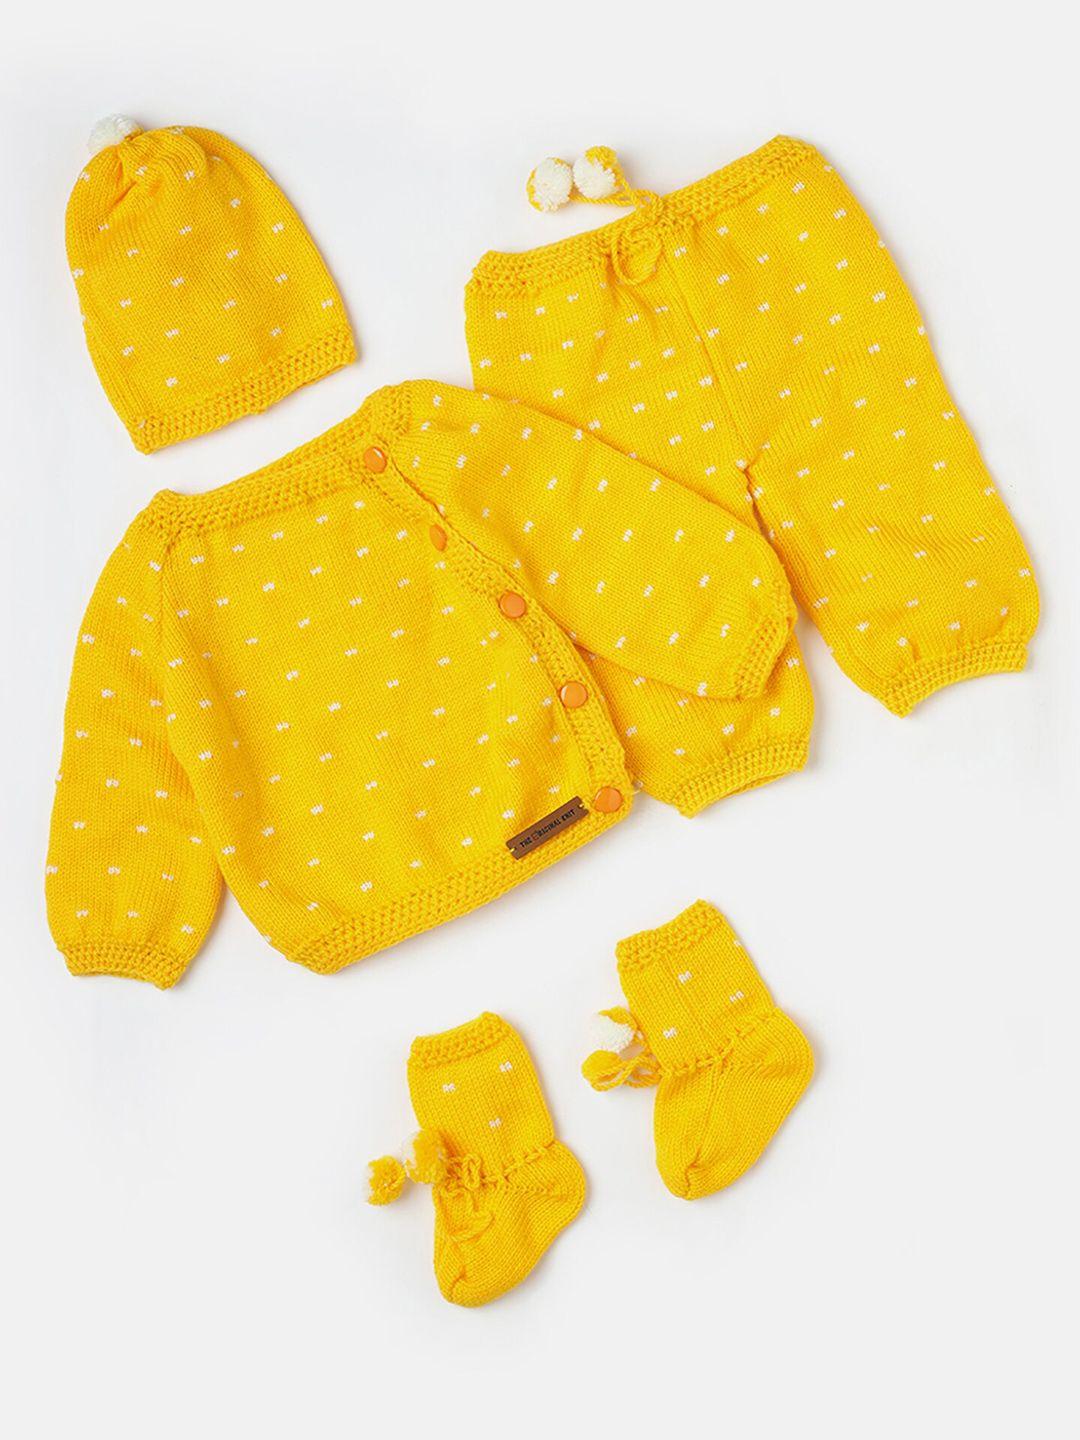 the original knit infants self-design sweater with trousers comes with cap & mittens